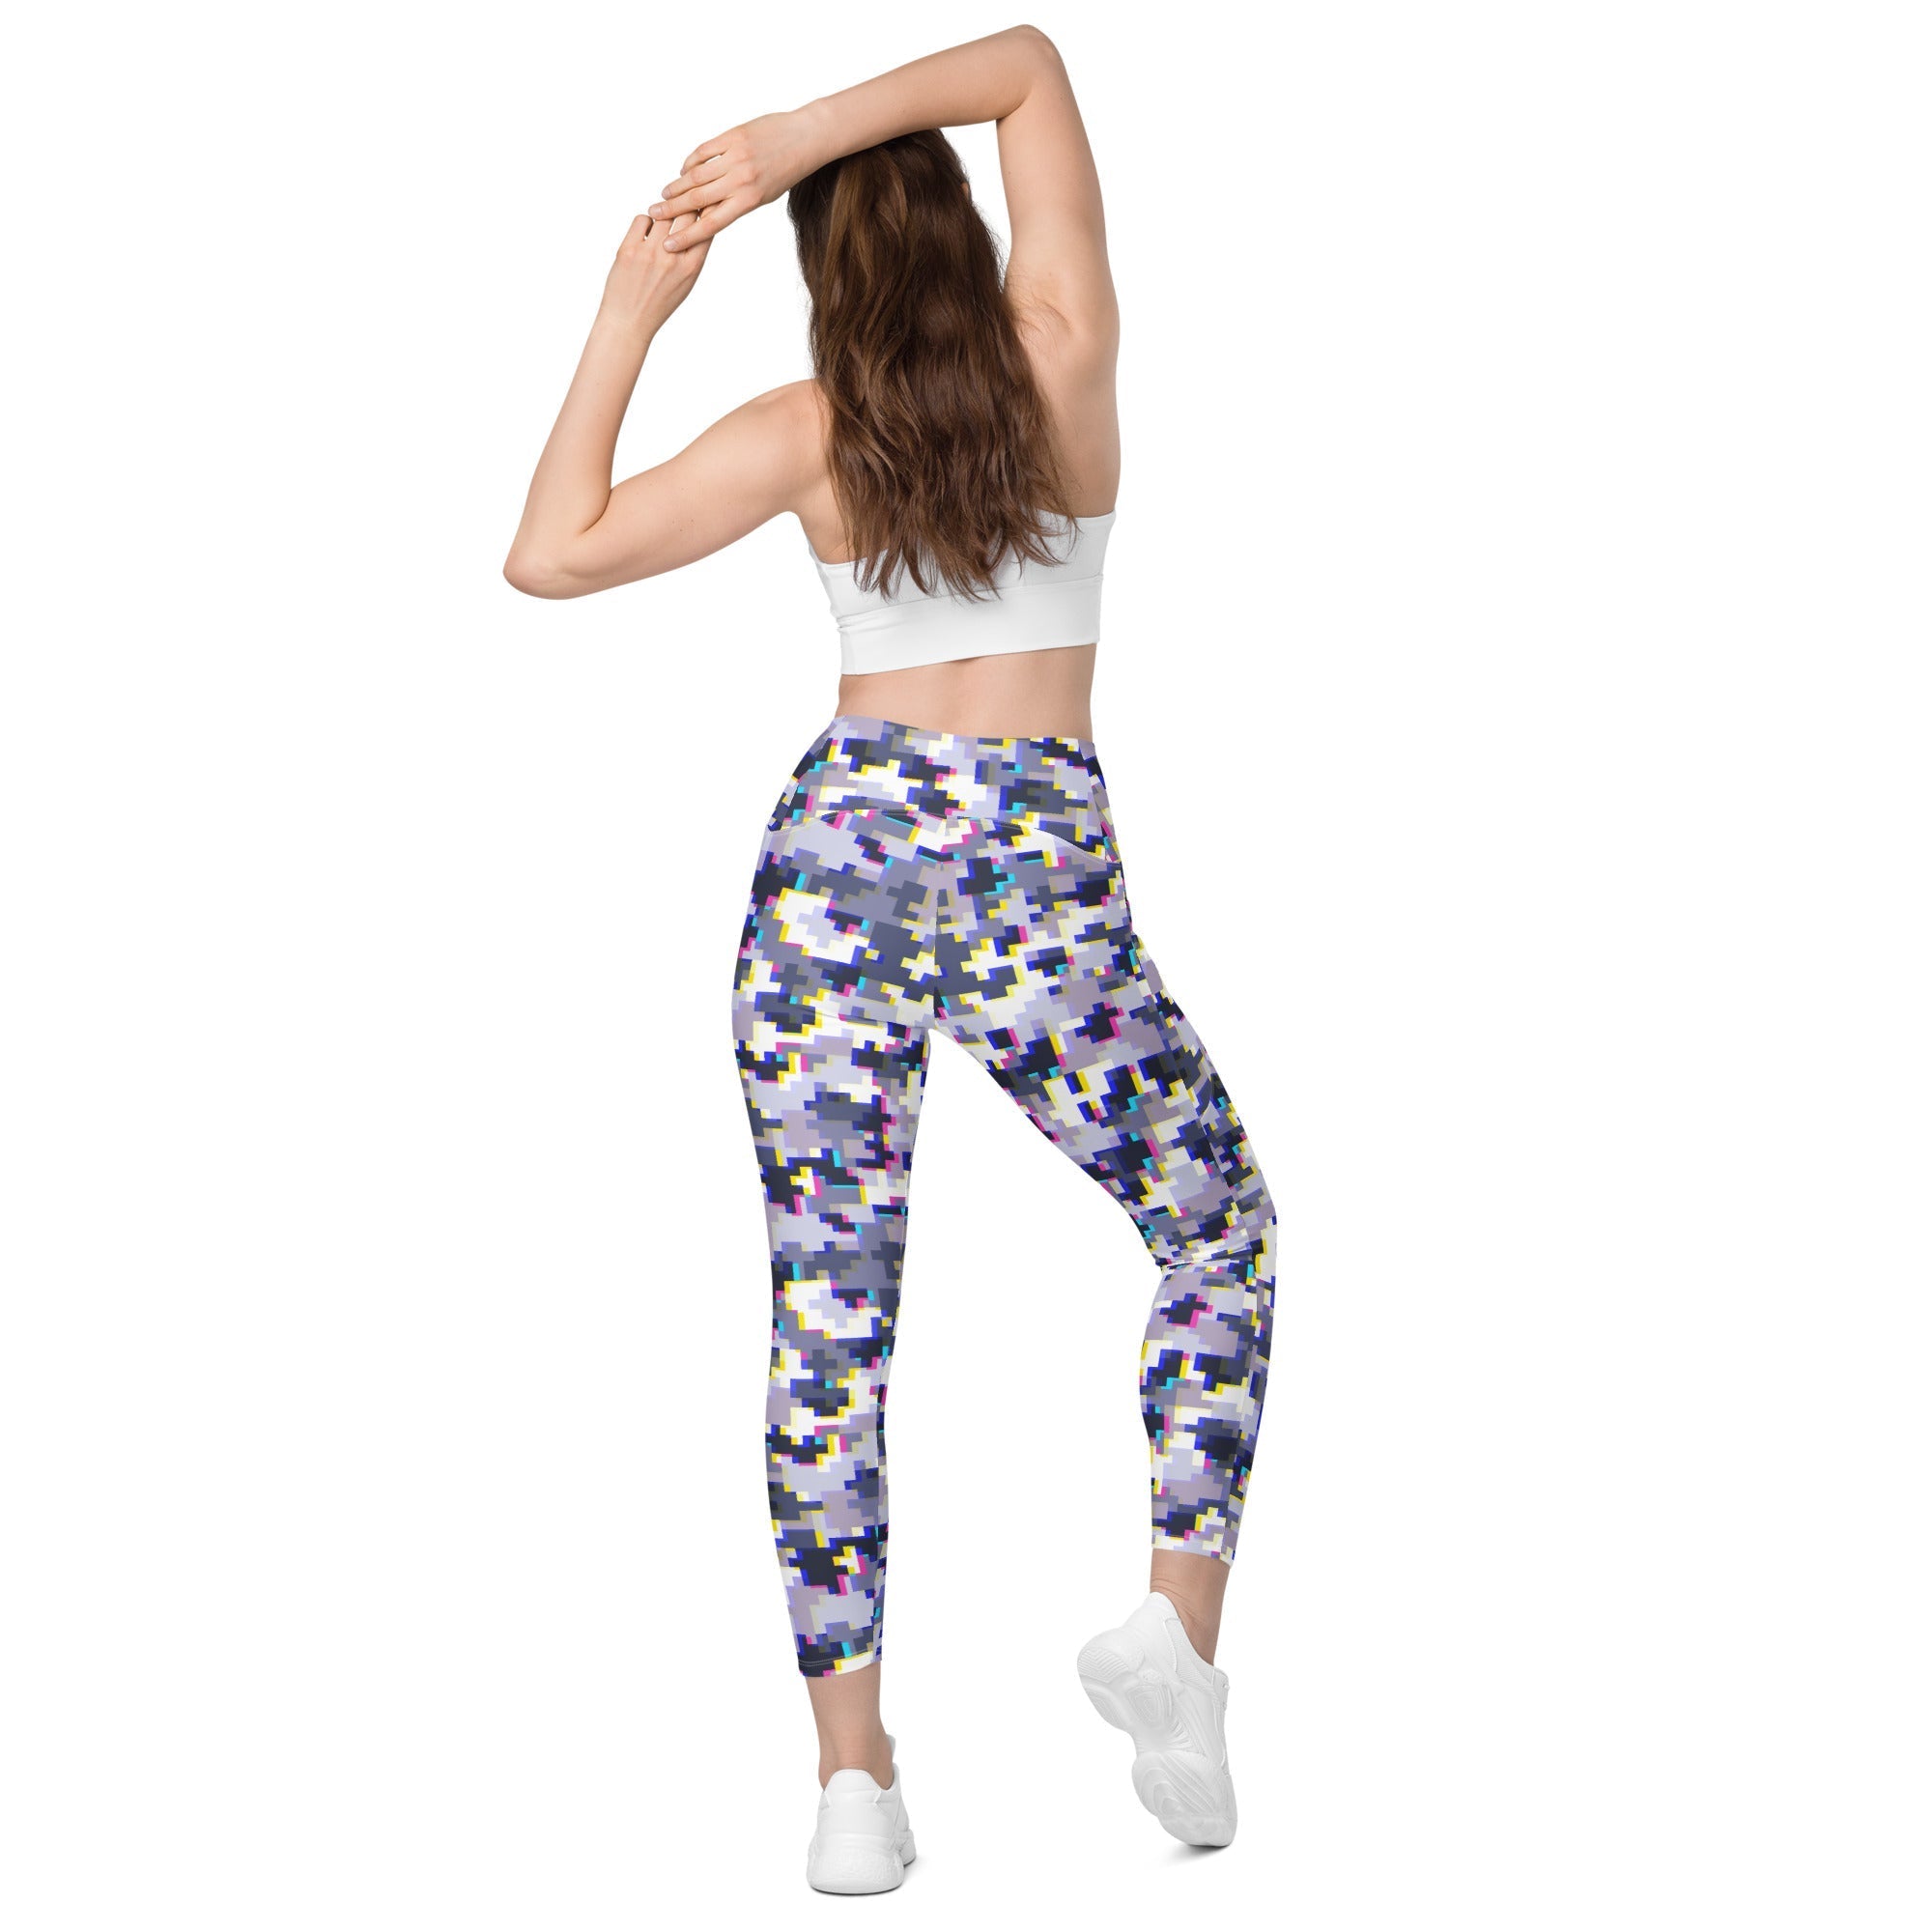 Glitchy Camo Crossover Leggings With Pockets